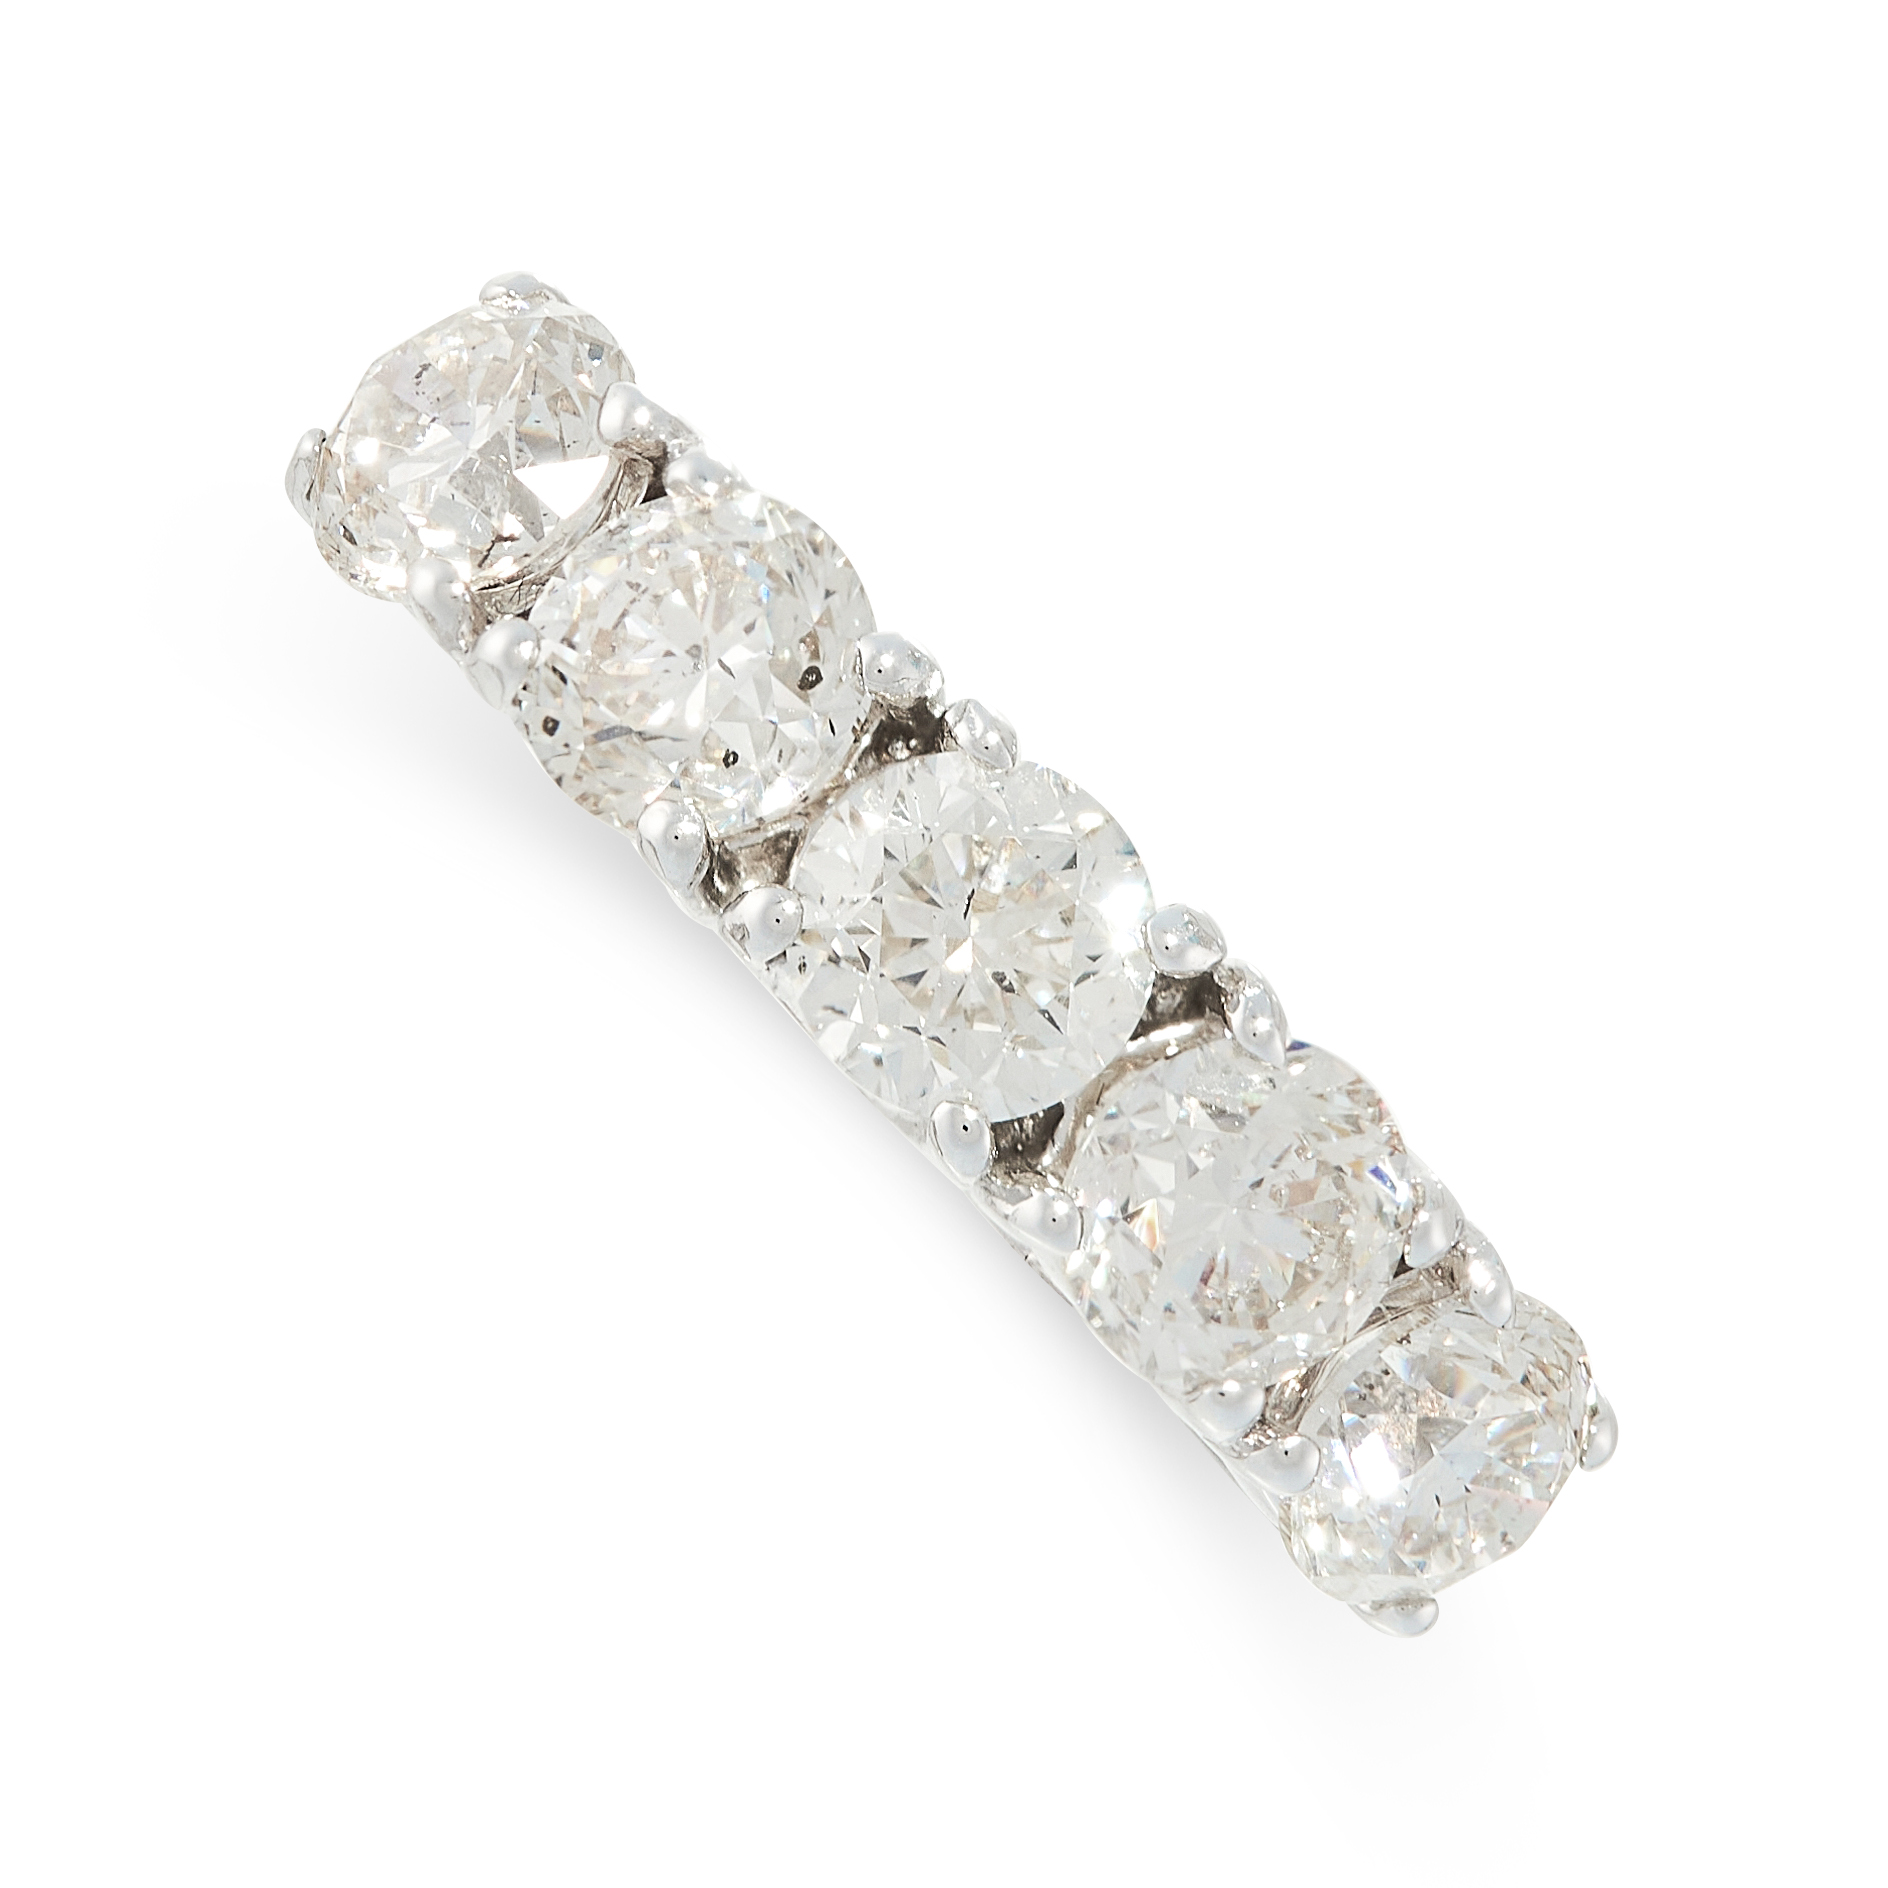 A DIAMOND FIVE STONE RING the band half set with round cut diamonds, the diamonds all totalling 2.55